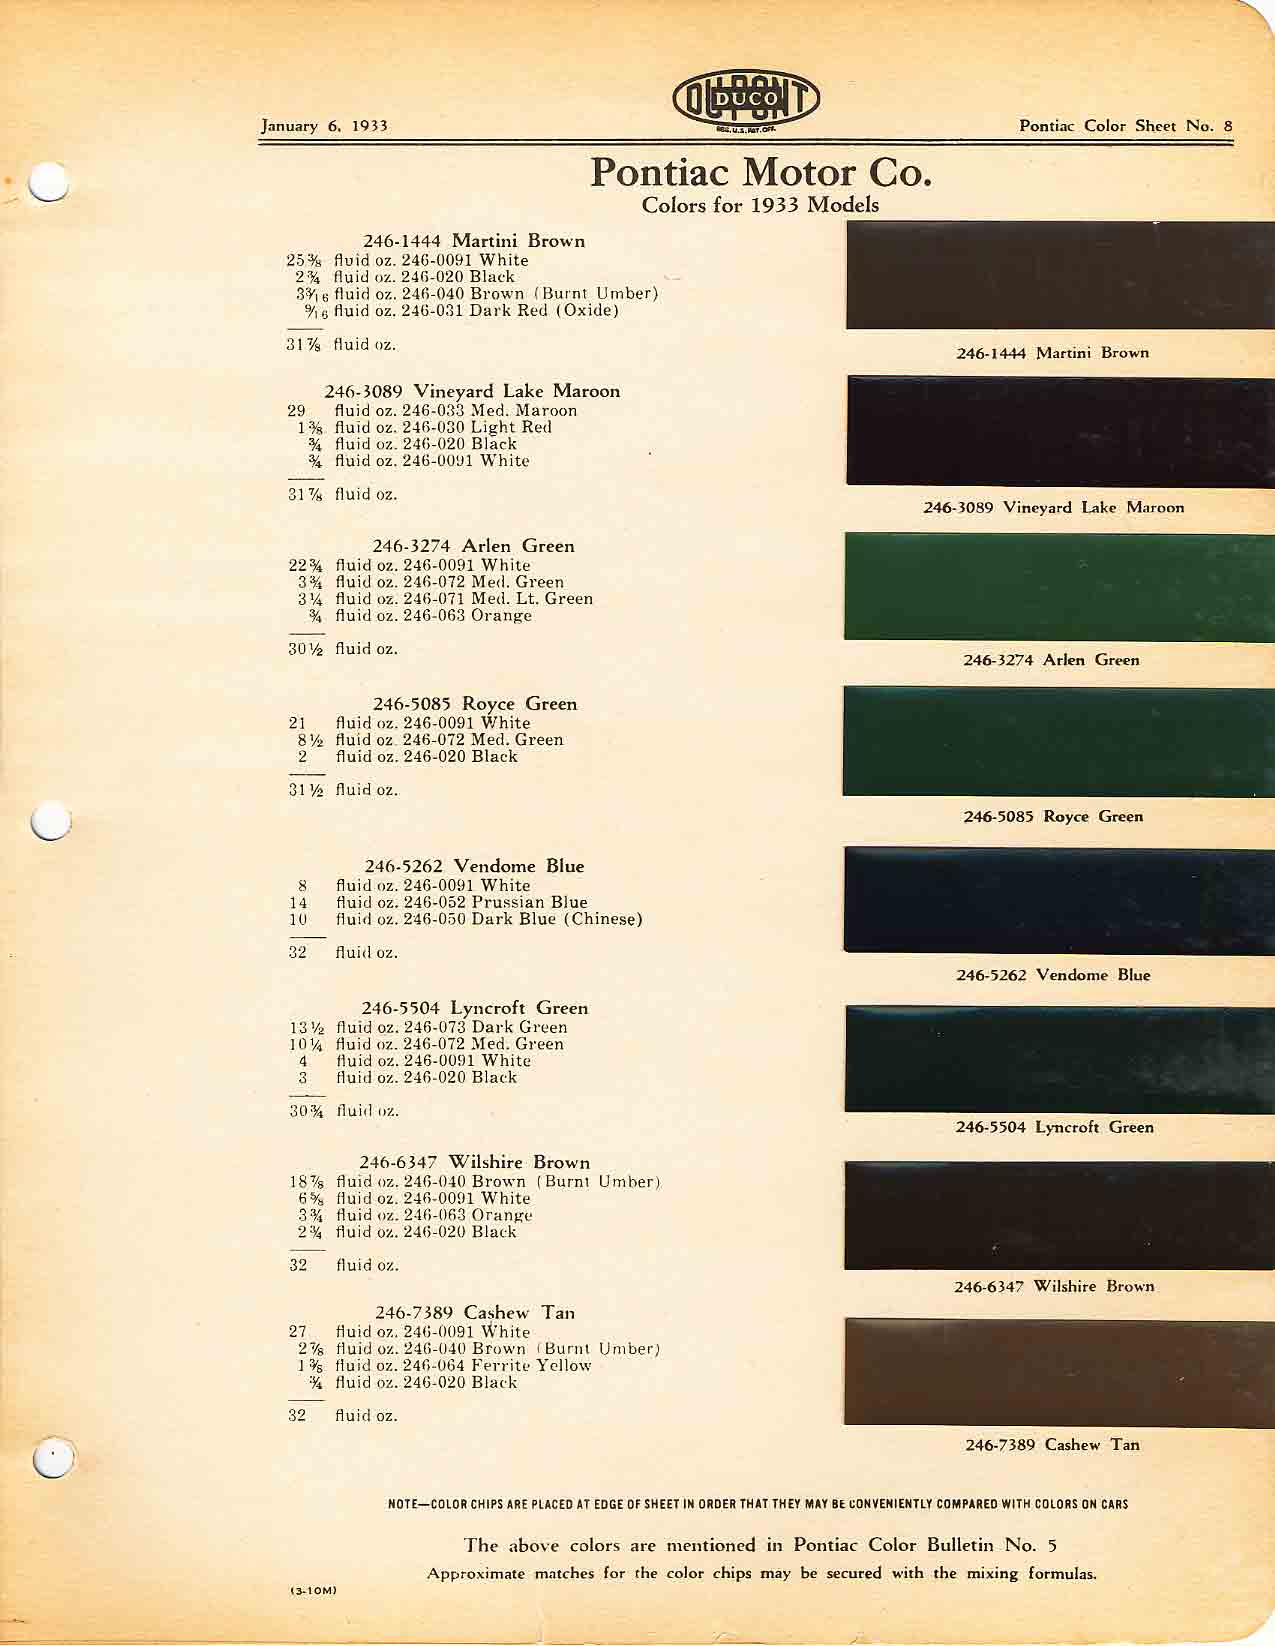 Colors and codes used on Pontiac Vehicles in 1933